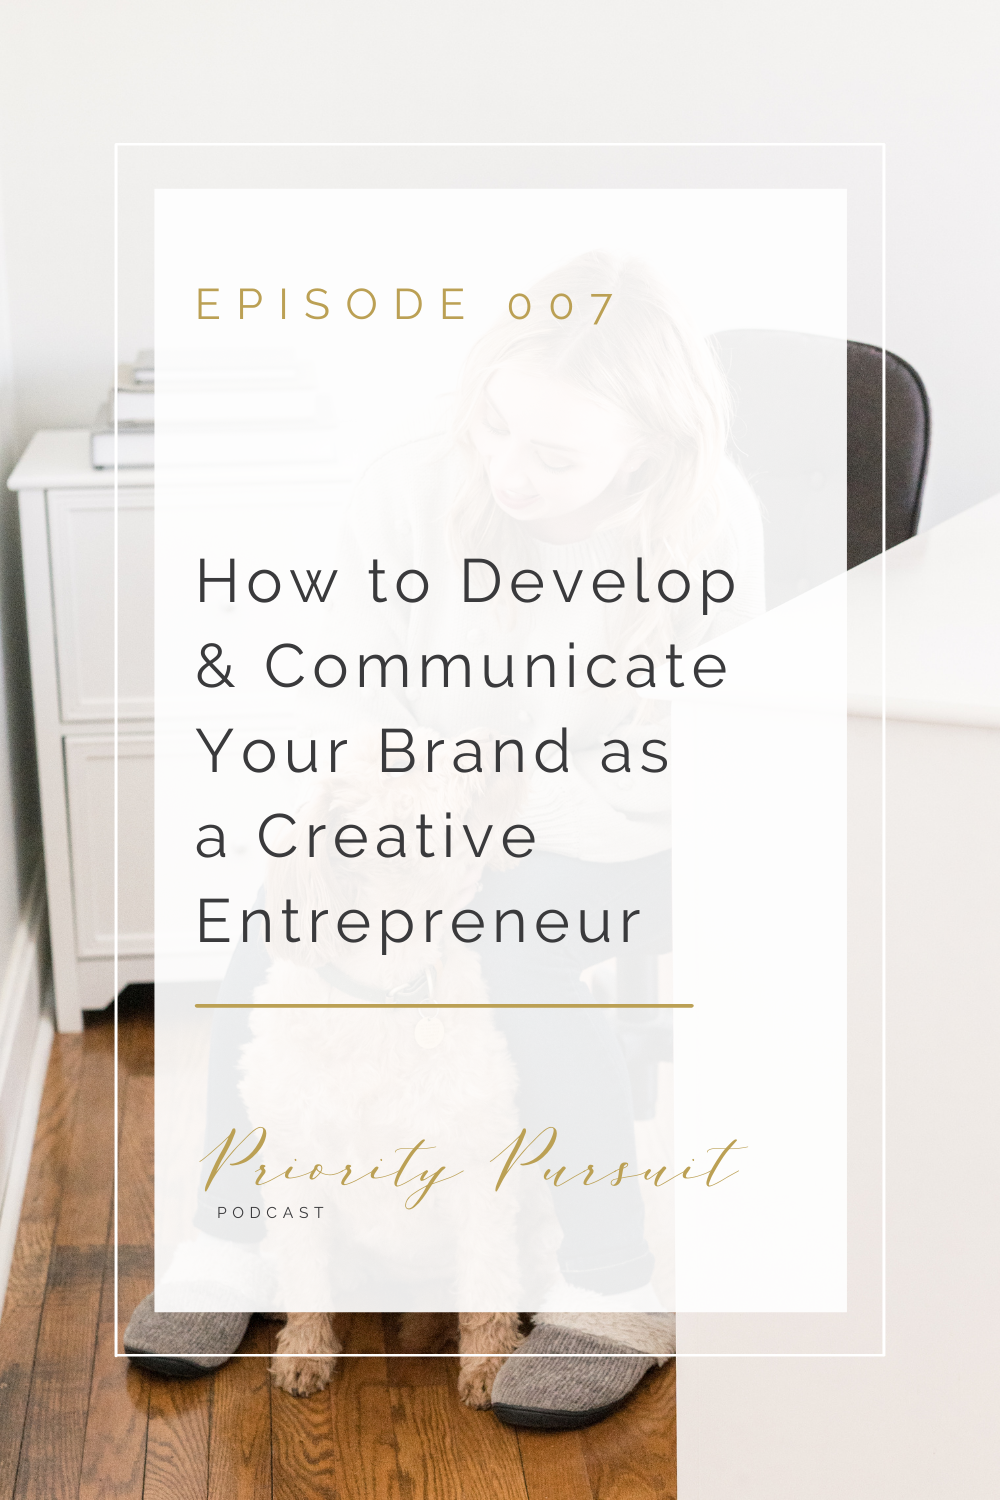 Victoria Rayburn explains how to develop and communicate your brand as a creative entrepreneur on the “Priority Pursuit Podcast”